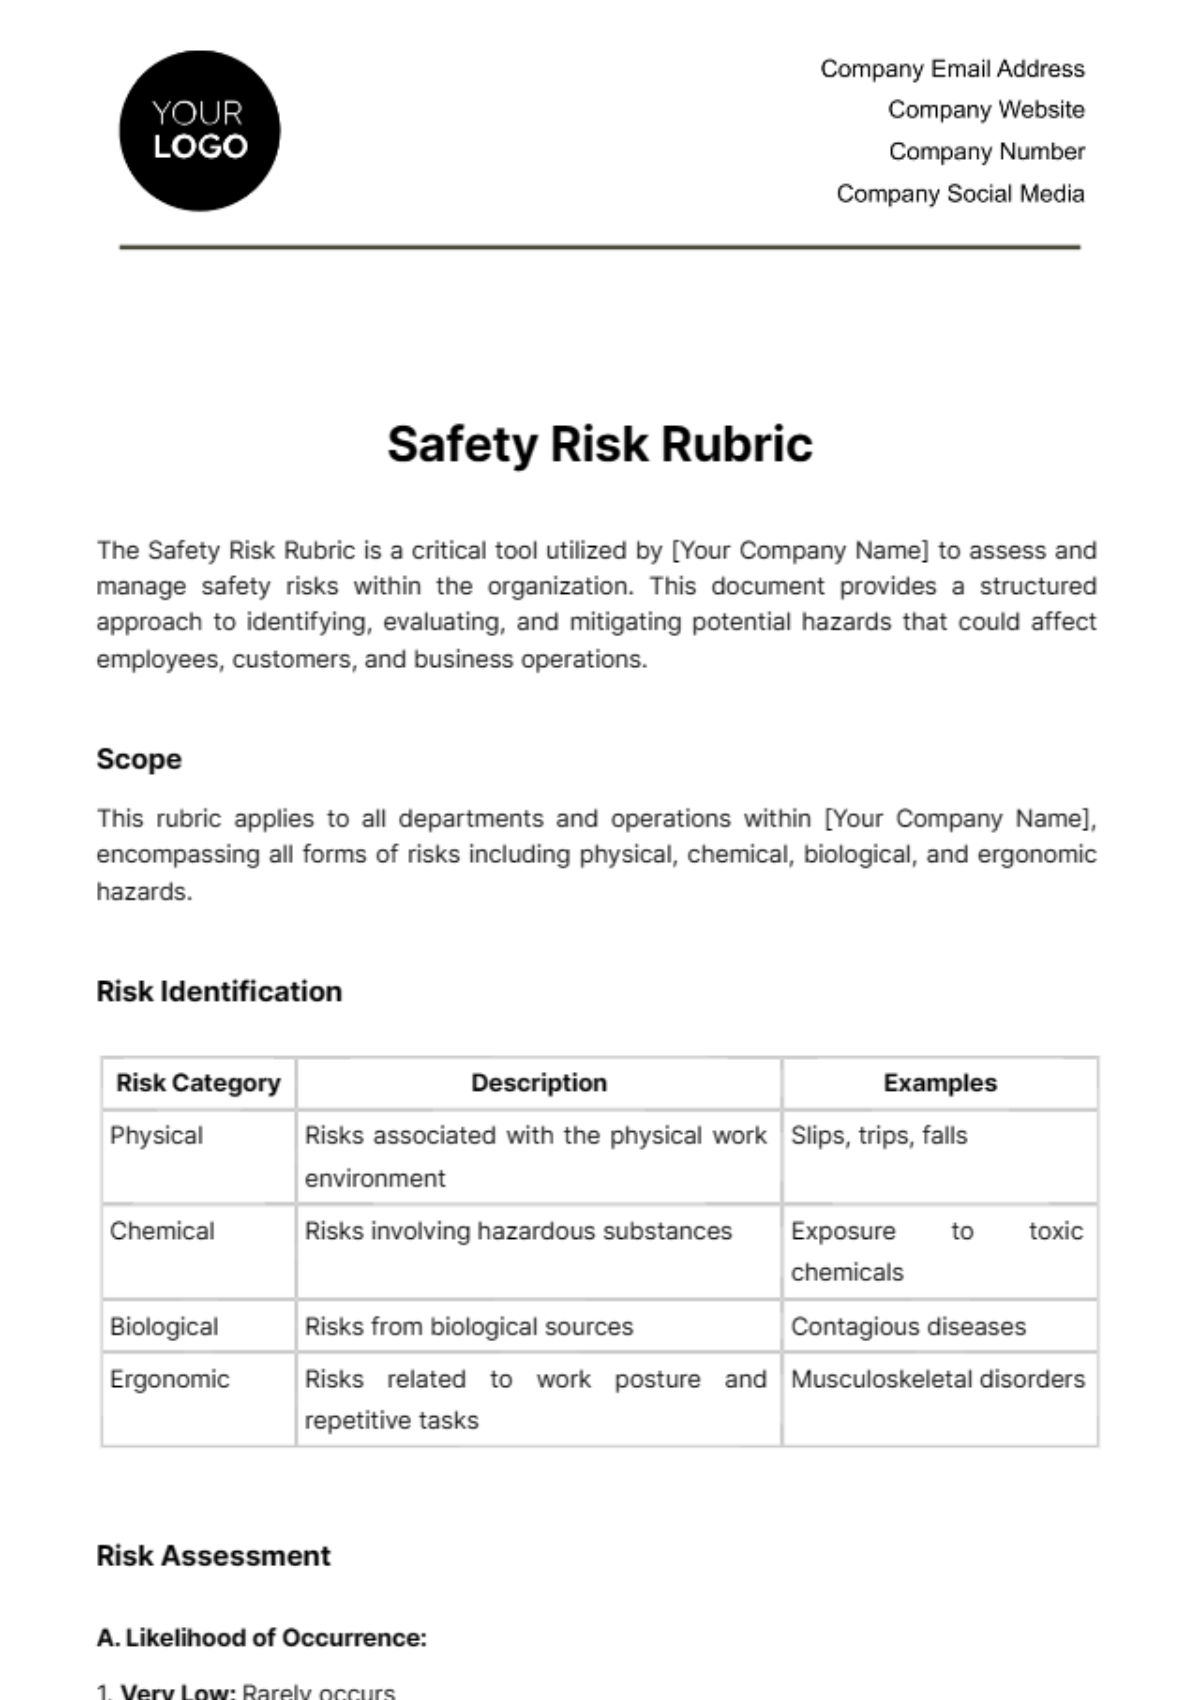 Safety Risk Rubric Template